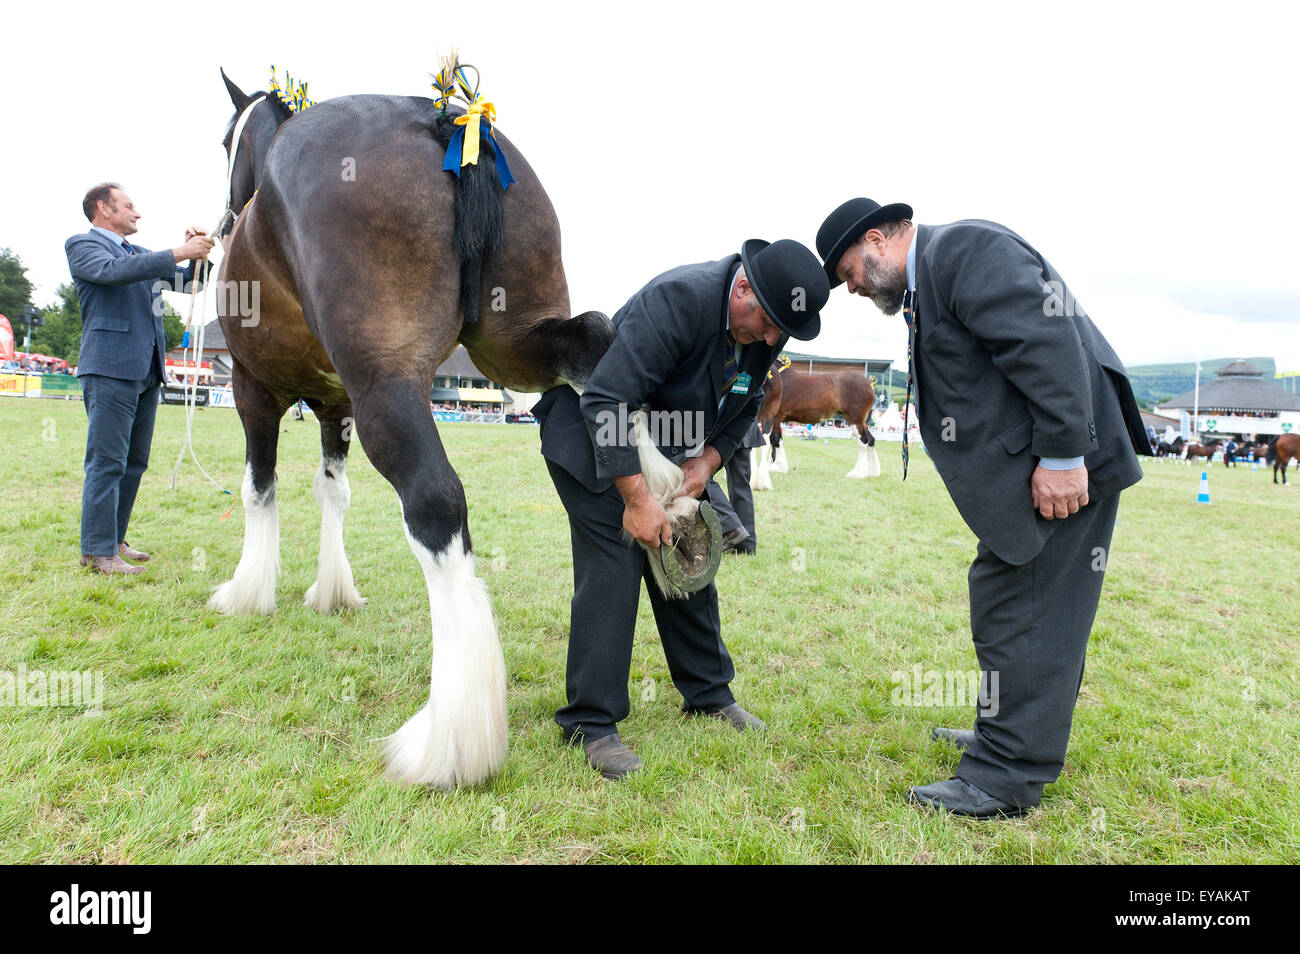 Llanelwedd, Powys, UK. 23rd July 2015. Judges check hooves of Shire Horses. The Royal Welsh Show is hailed as the largest & most prestigious event of it's kind in Europe. In excess of 200,000 visitors are expected this week over the four day show period - 2014 saw 237,694 visitors, 1,033 tradestands & a record 7,959 livestock exhibitors. The first ever show was at Aberystwyth in 1904 and attracted 442 livestock entries. Credit:  Graham M. Lawrence/Alamy Live News. Stock Photo